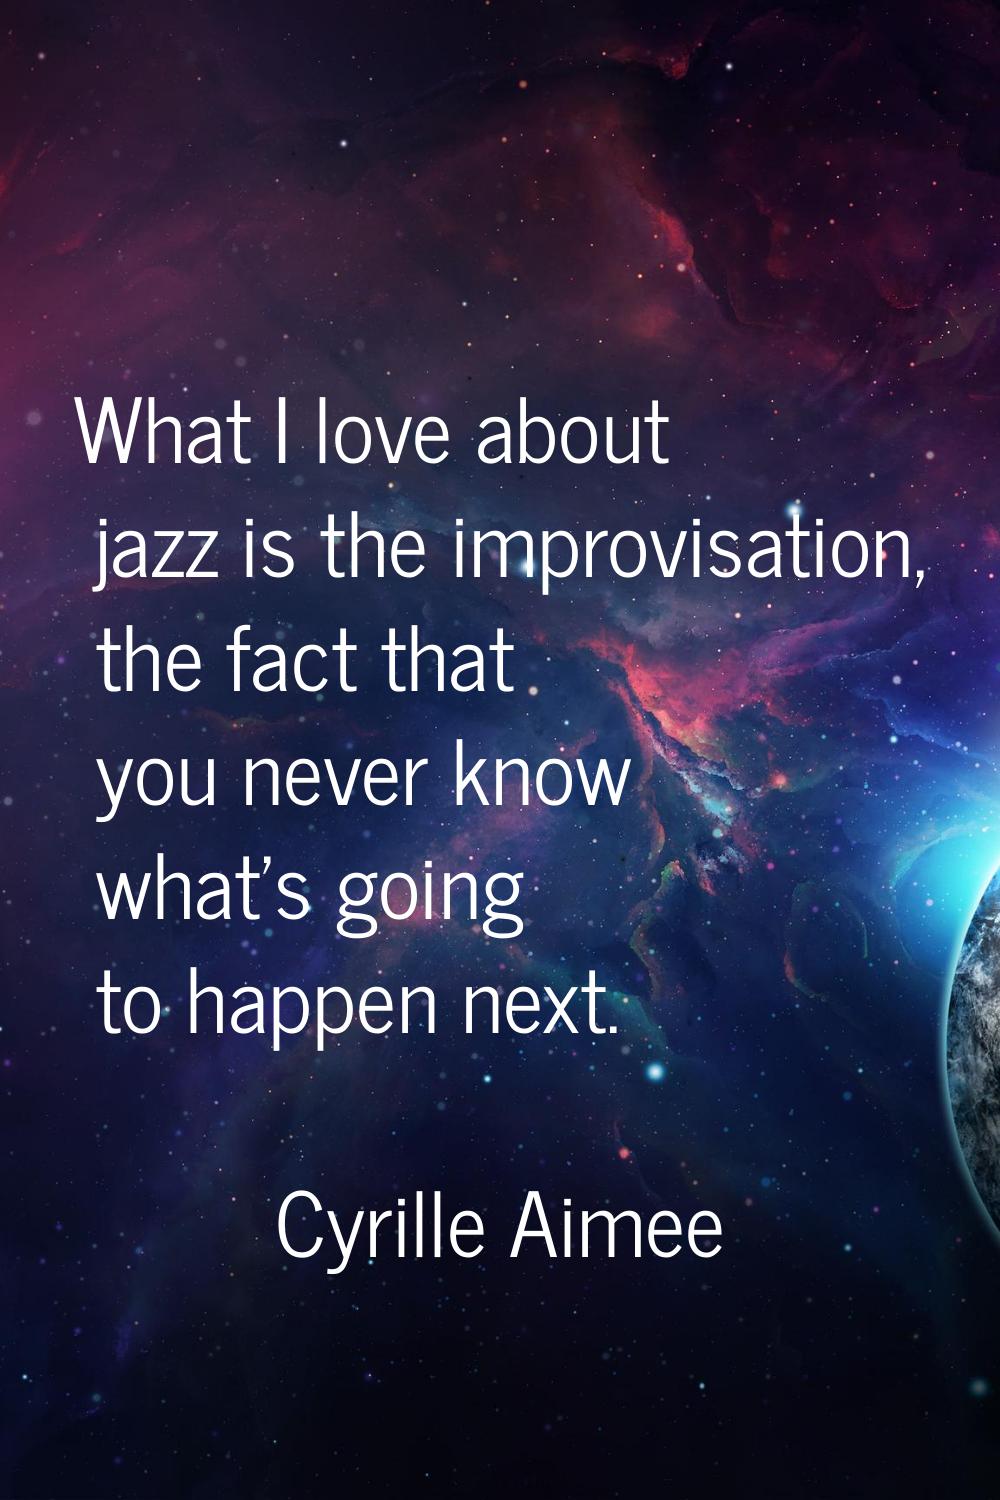 What I love about jazz is the improvisation, the fact that you never know what's going to happen ne